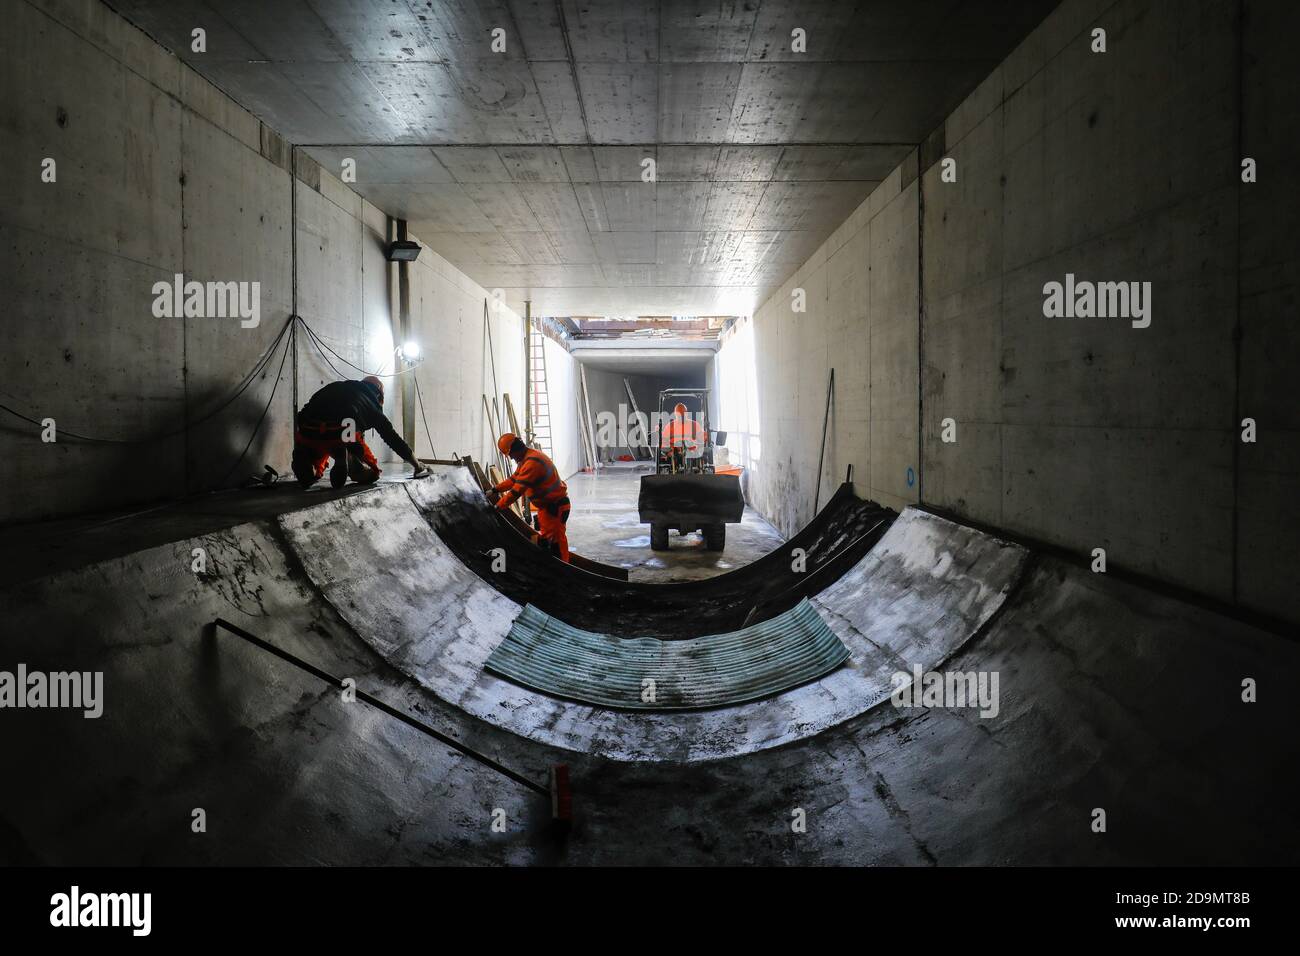 New construction of the Berne sewer, inlet channel to a rain overflow basin, the Berne belongs to the Emscher river system, was previously an open, above-ground wastewater sewer, Emscher conversion, Essen, Ruhr area, North Rhine-Westphalia, Germany Stock Photo